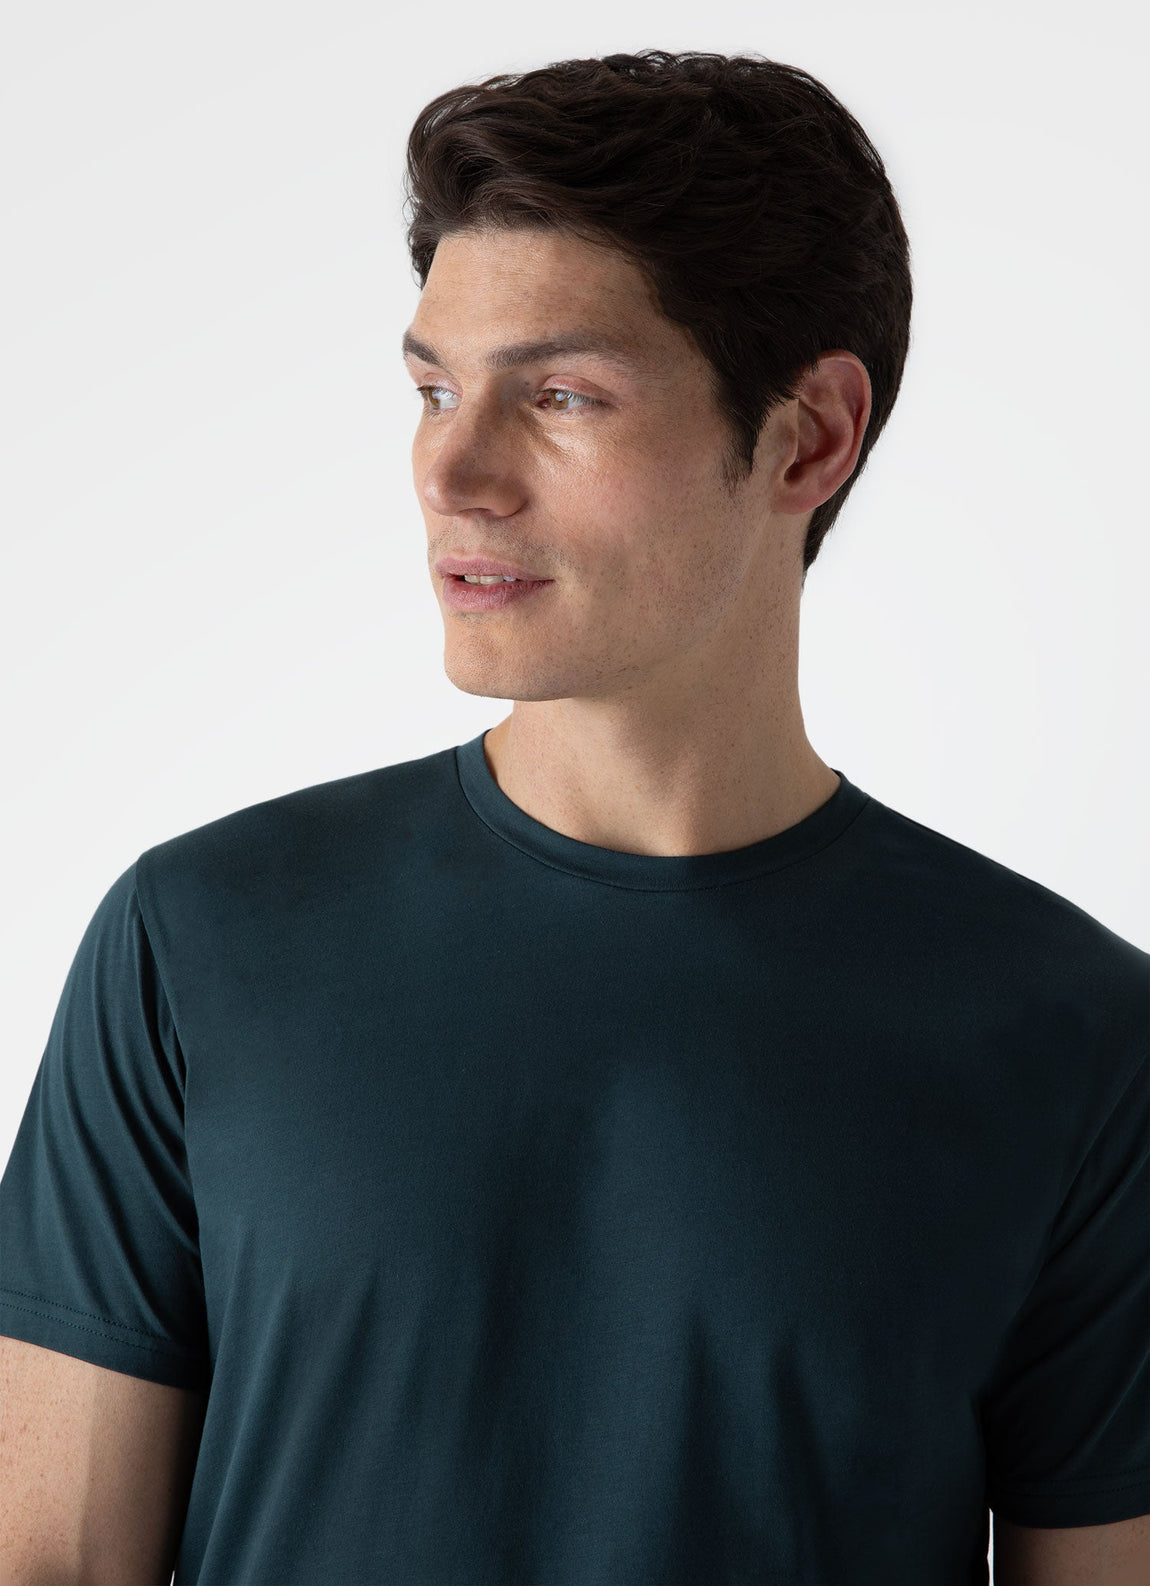 Men's Riviera Midweight T-shirt in Peacock